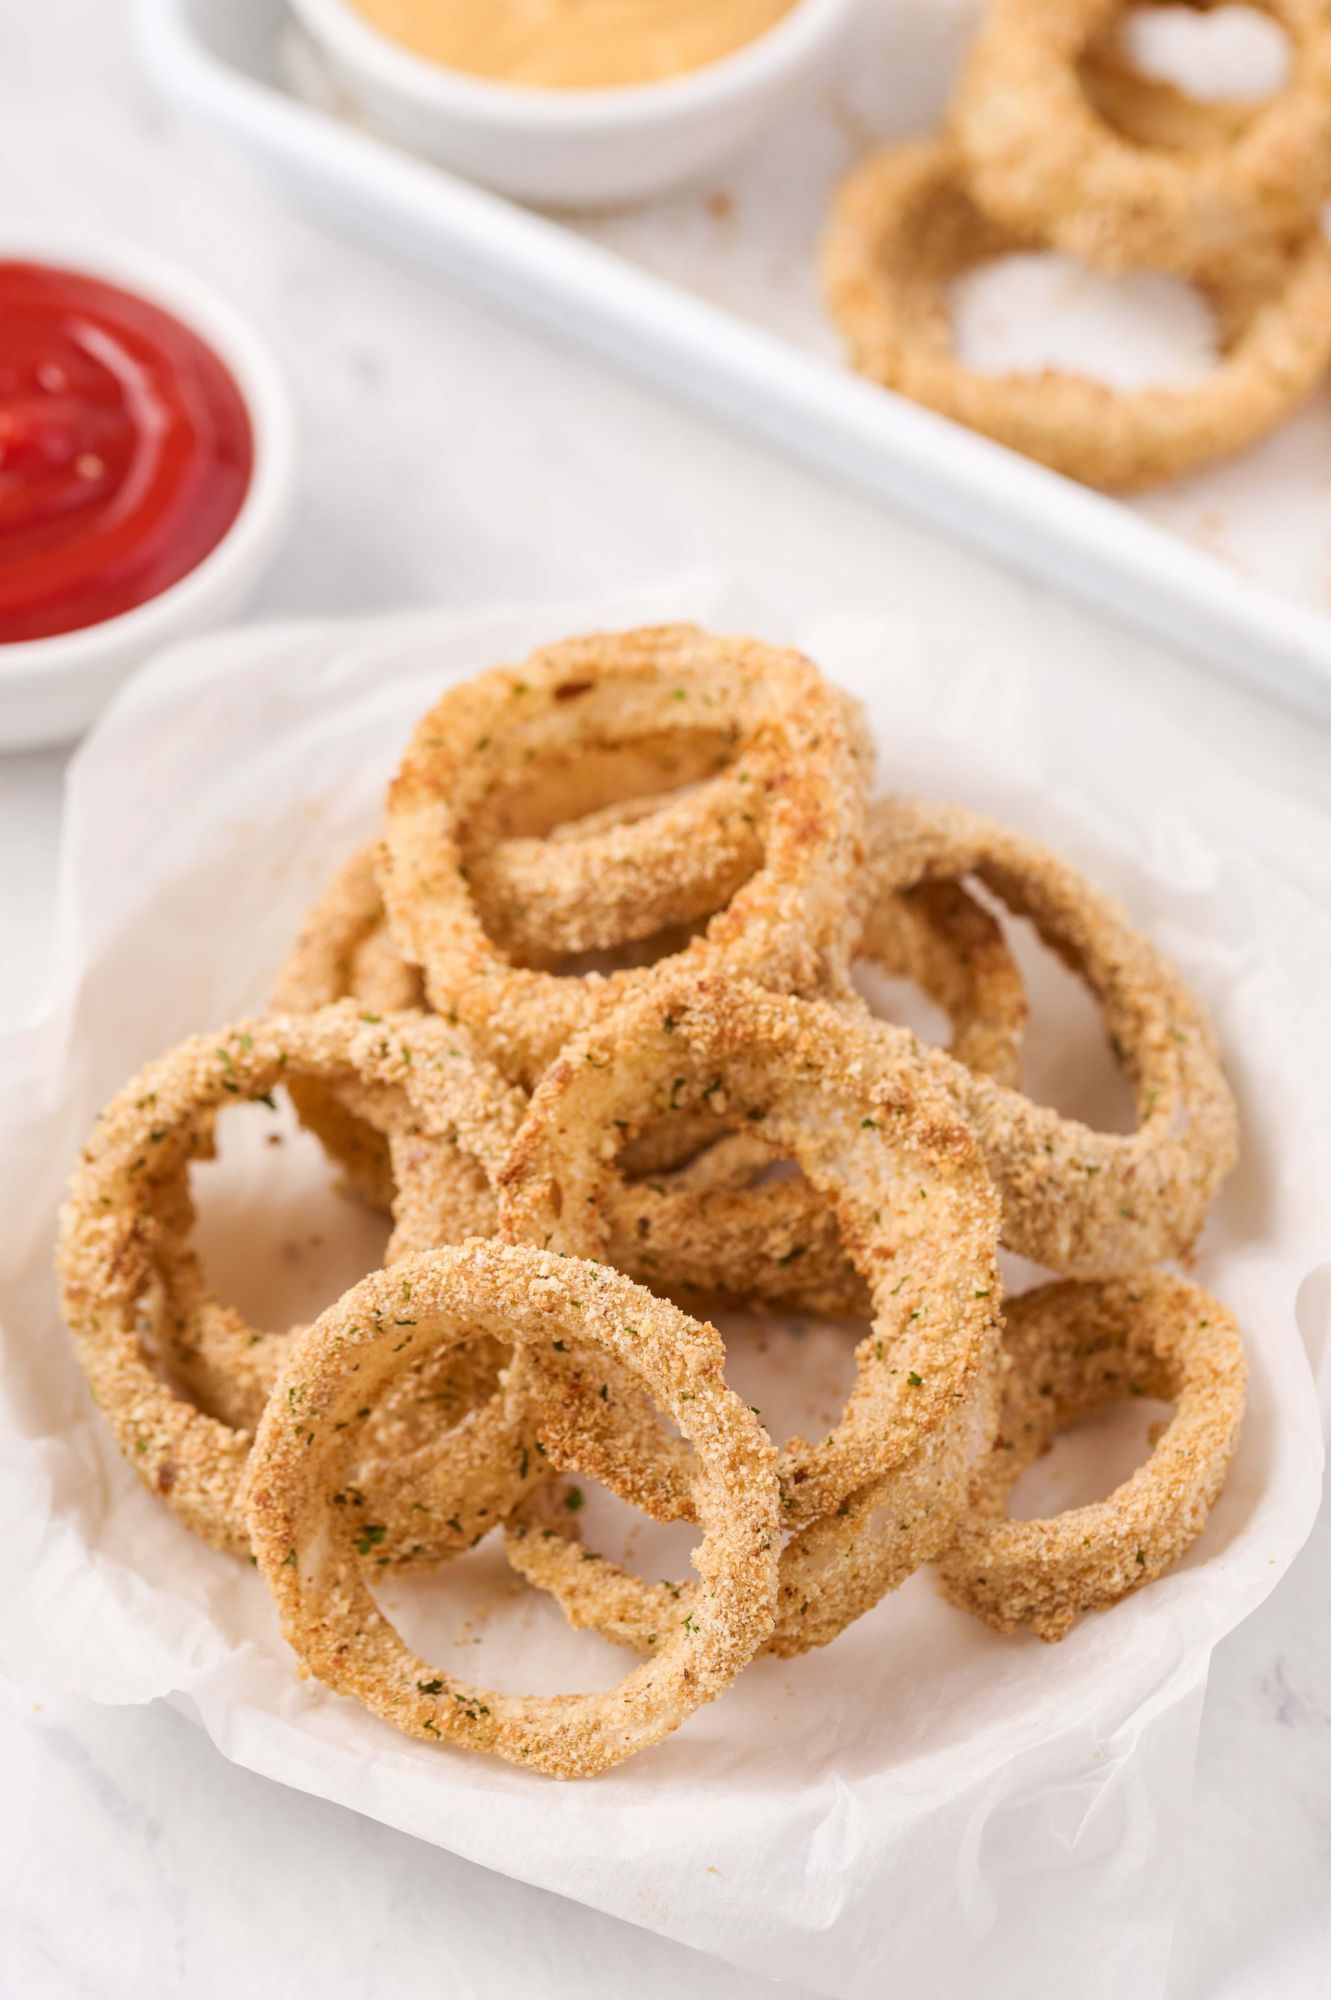 Crispy baked onion rings on a plate served with ketchup.